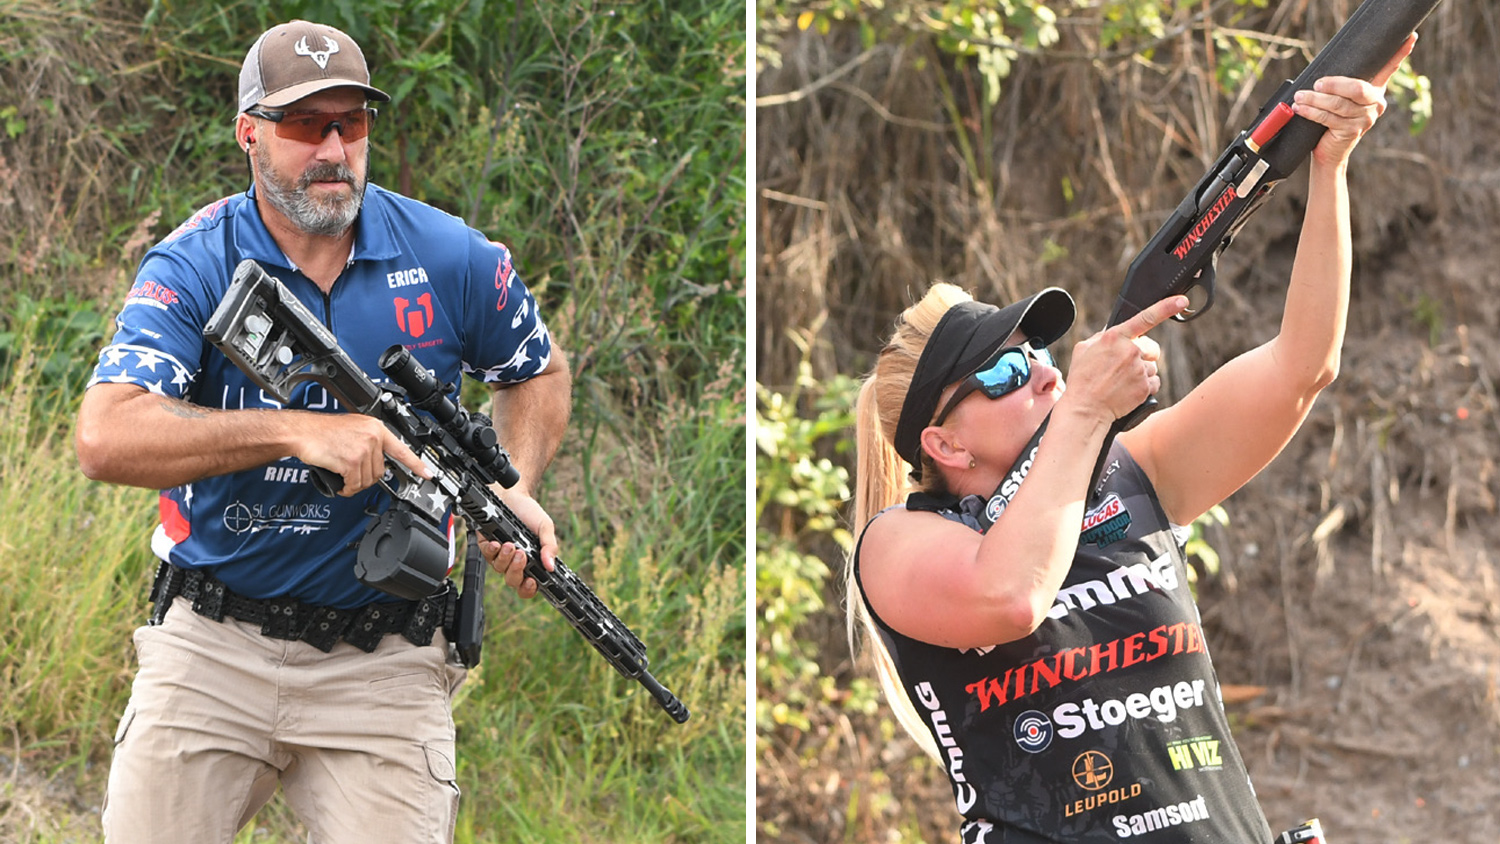 Erich Leipold and Becky Yackley | 2019 USPSA Multi-Gun Nationals